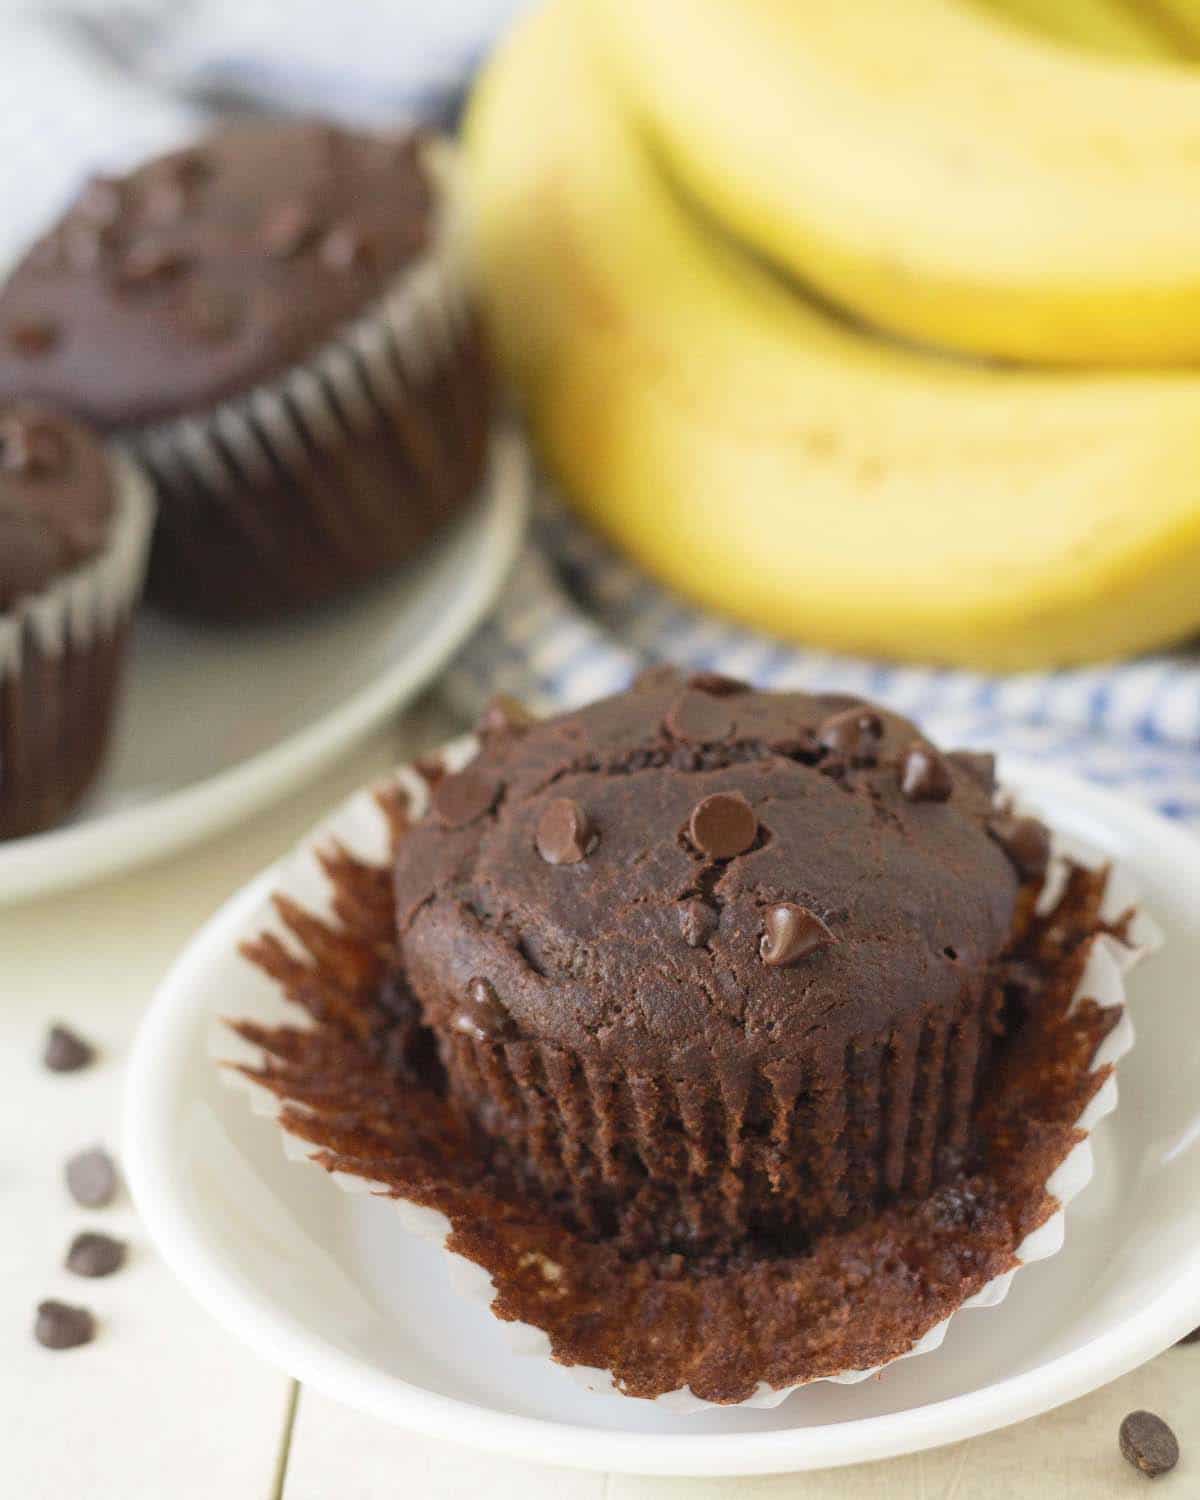 An egg-free, dairy-free chocolate banana muffin on a plate with the muffin wrapper peeled down.